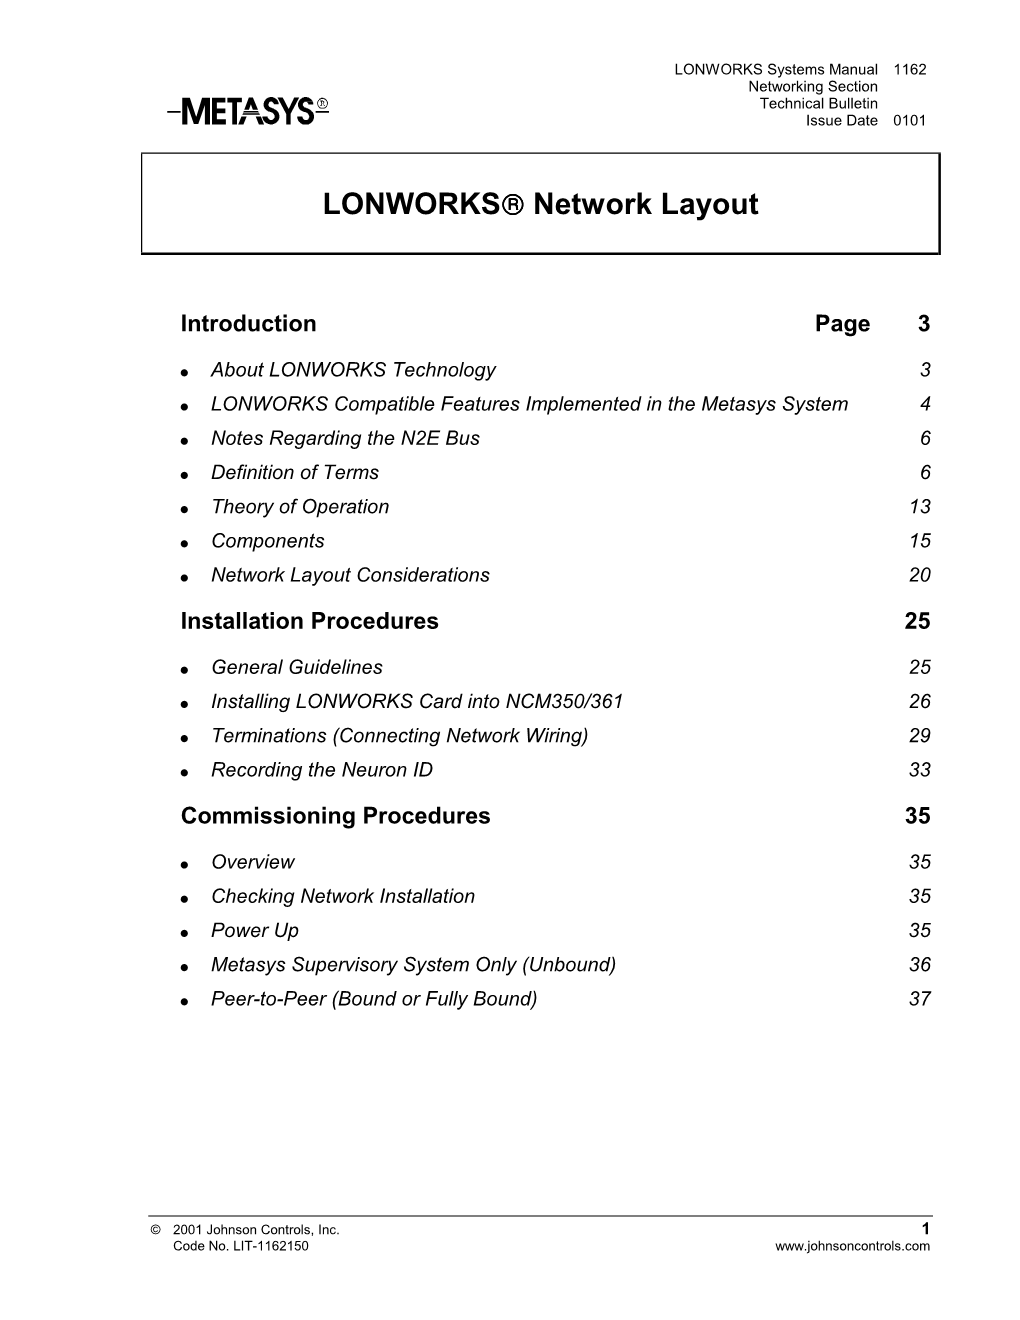 LONWORKS Systems Manual 1162 Networking Section Technical Bulletin Issue Date 0101